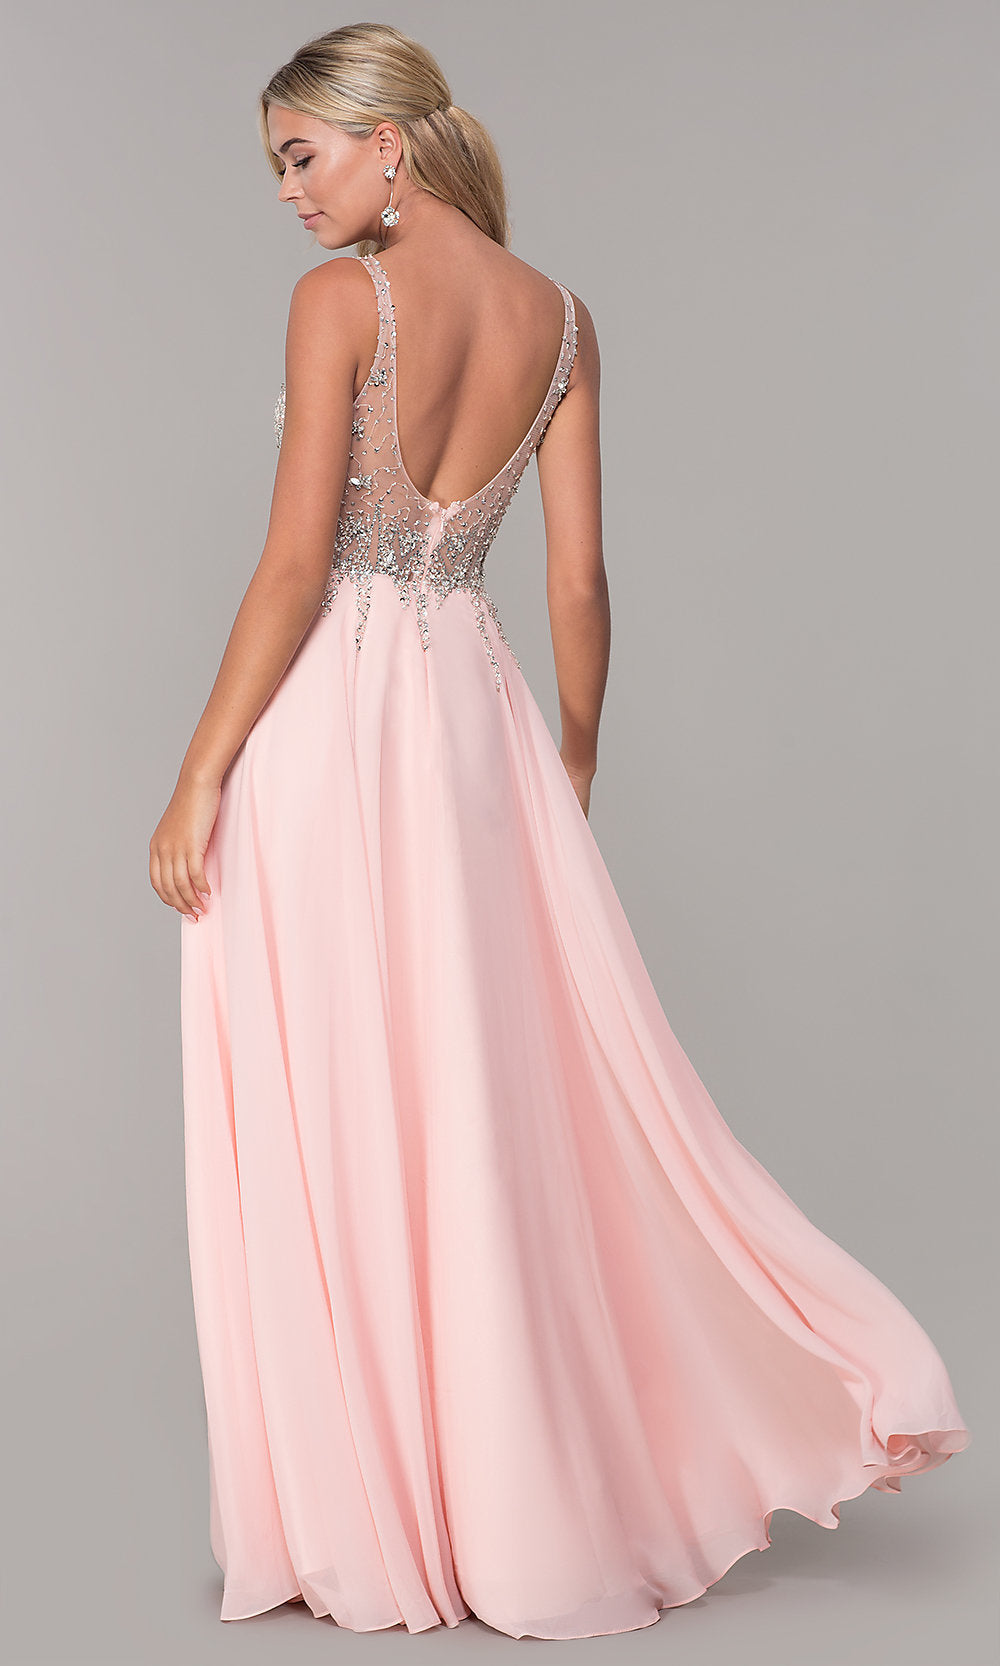  Long Open-Back Prom Dress with Beaded Bodice